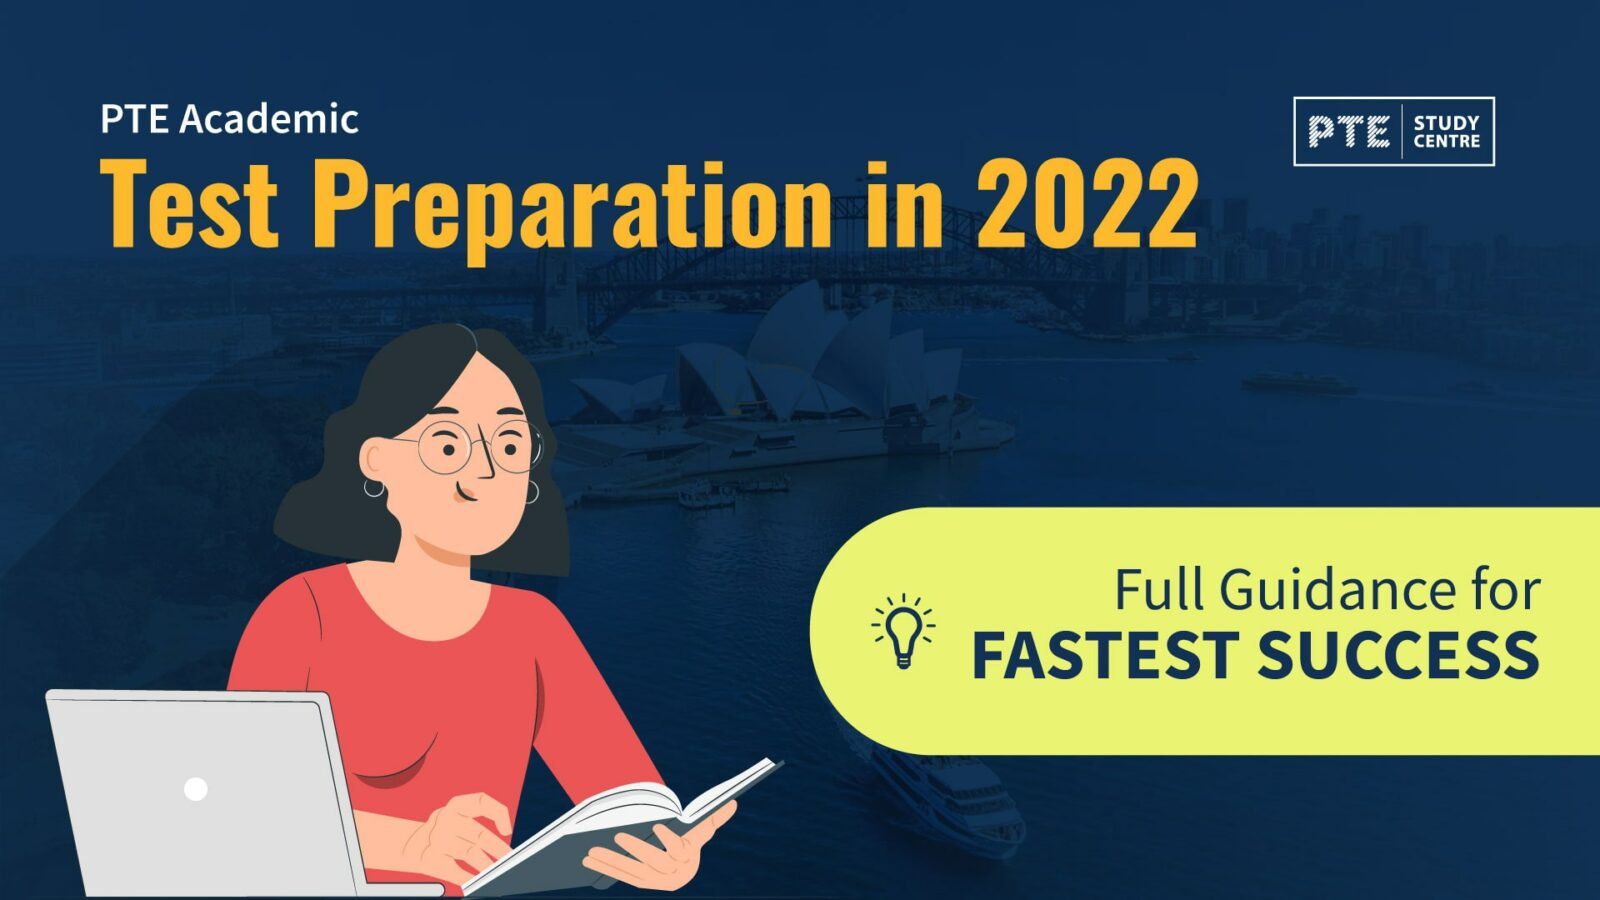 PTE Academic Test Preparation in 2022